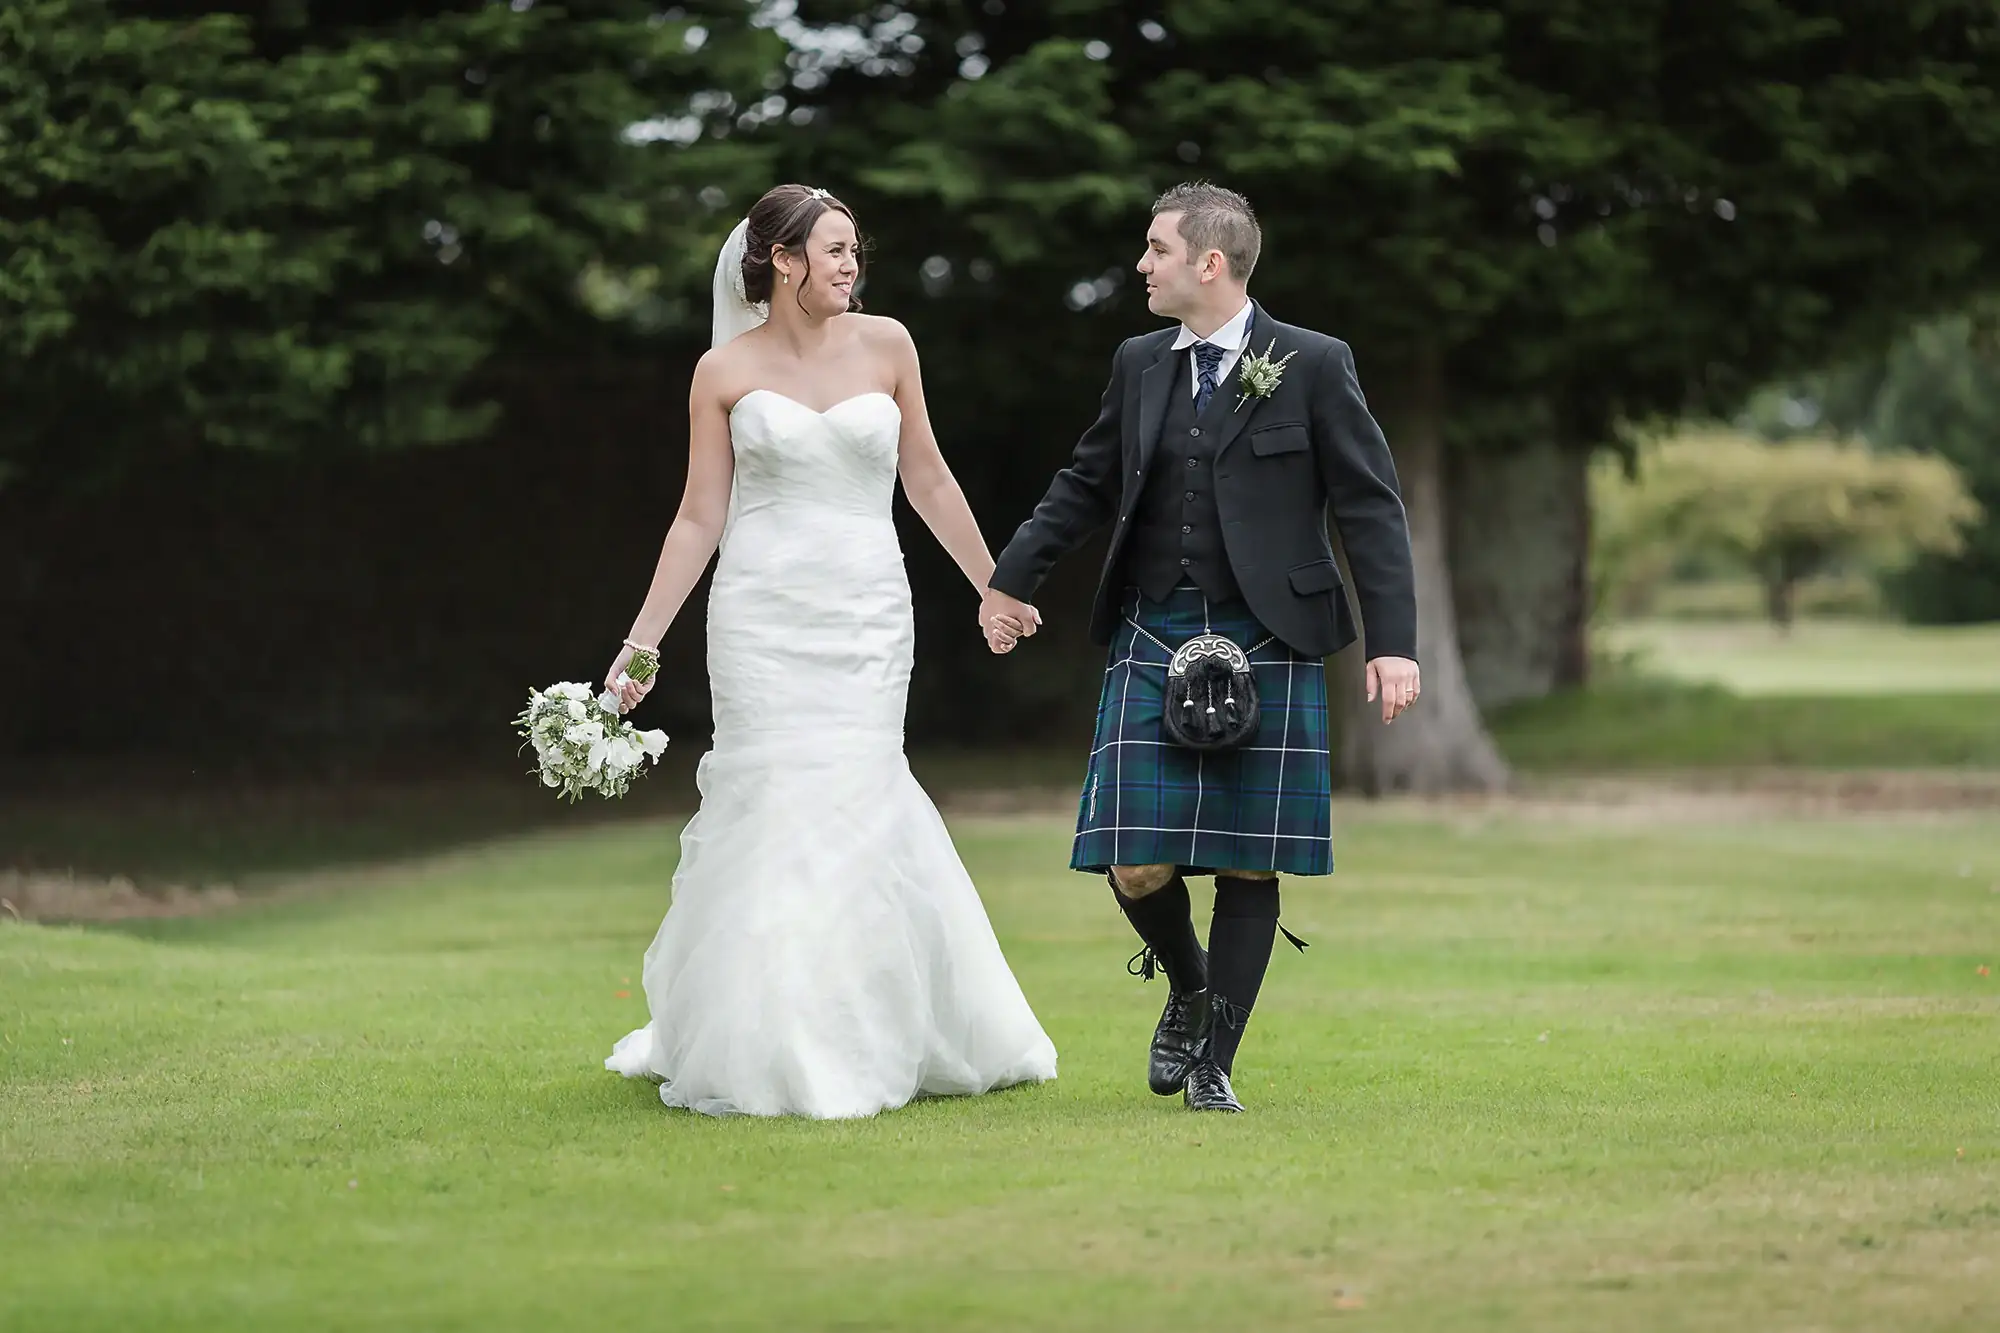 Bride in a white dress and groom in a kilt holding hands and walking through a grassy field, smiling at each other.